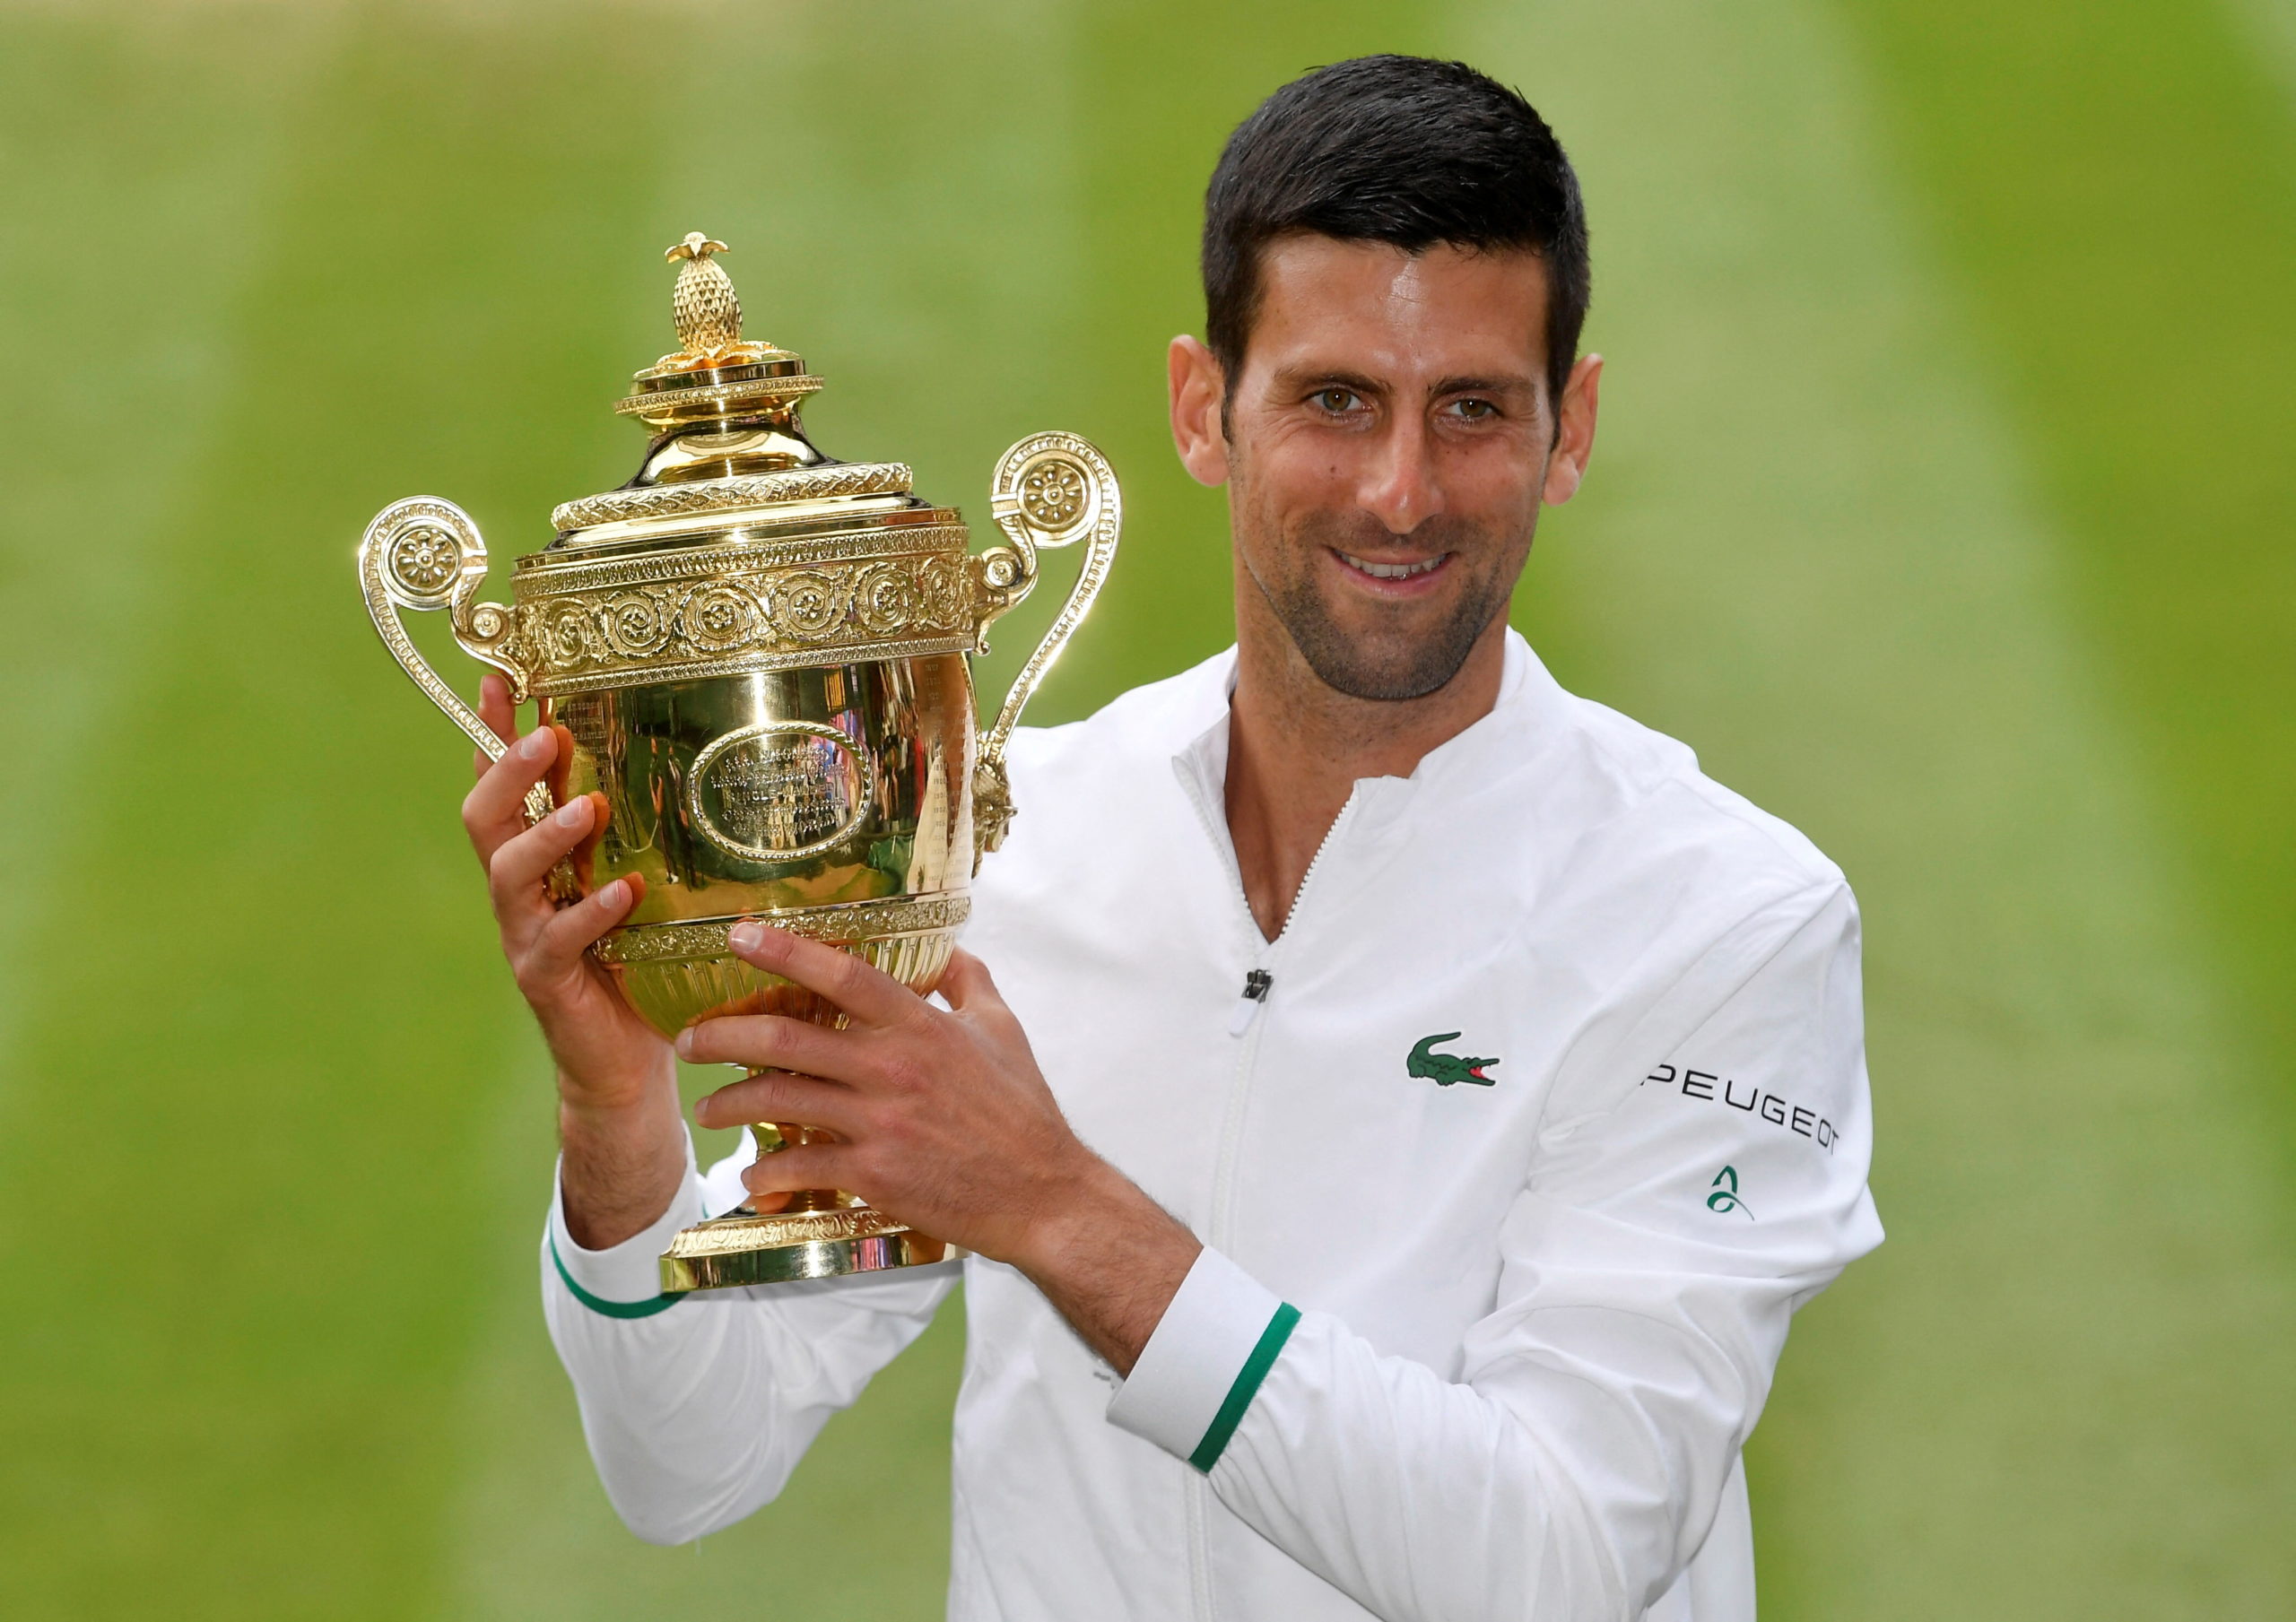 July 11, 2021 Serbia's Novak Djokovic celebrates with the trophy after winning his final match against Italy's Matteo Berrettini